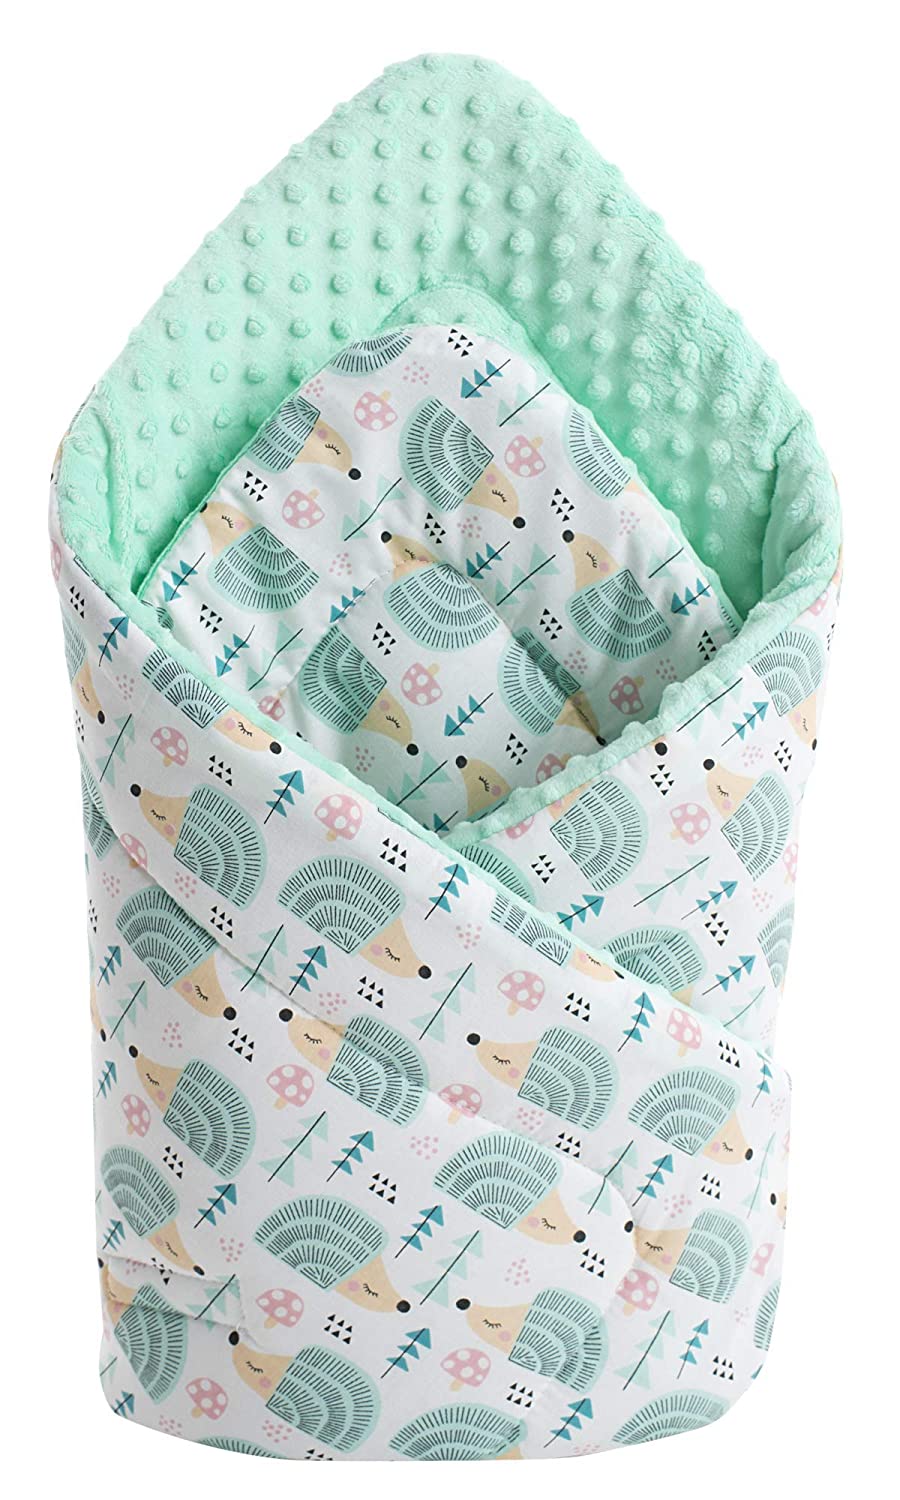 Medi Partners Swaddling Blanket Pillow Minky 100% Cotton 75 x 75 cm Sleeping Bag Double-Sided Soft All Year Round Multifunctional Anti-Allergic Babies (Mint Hedgehog with Mint Minky)